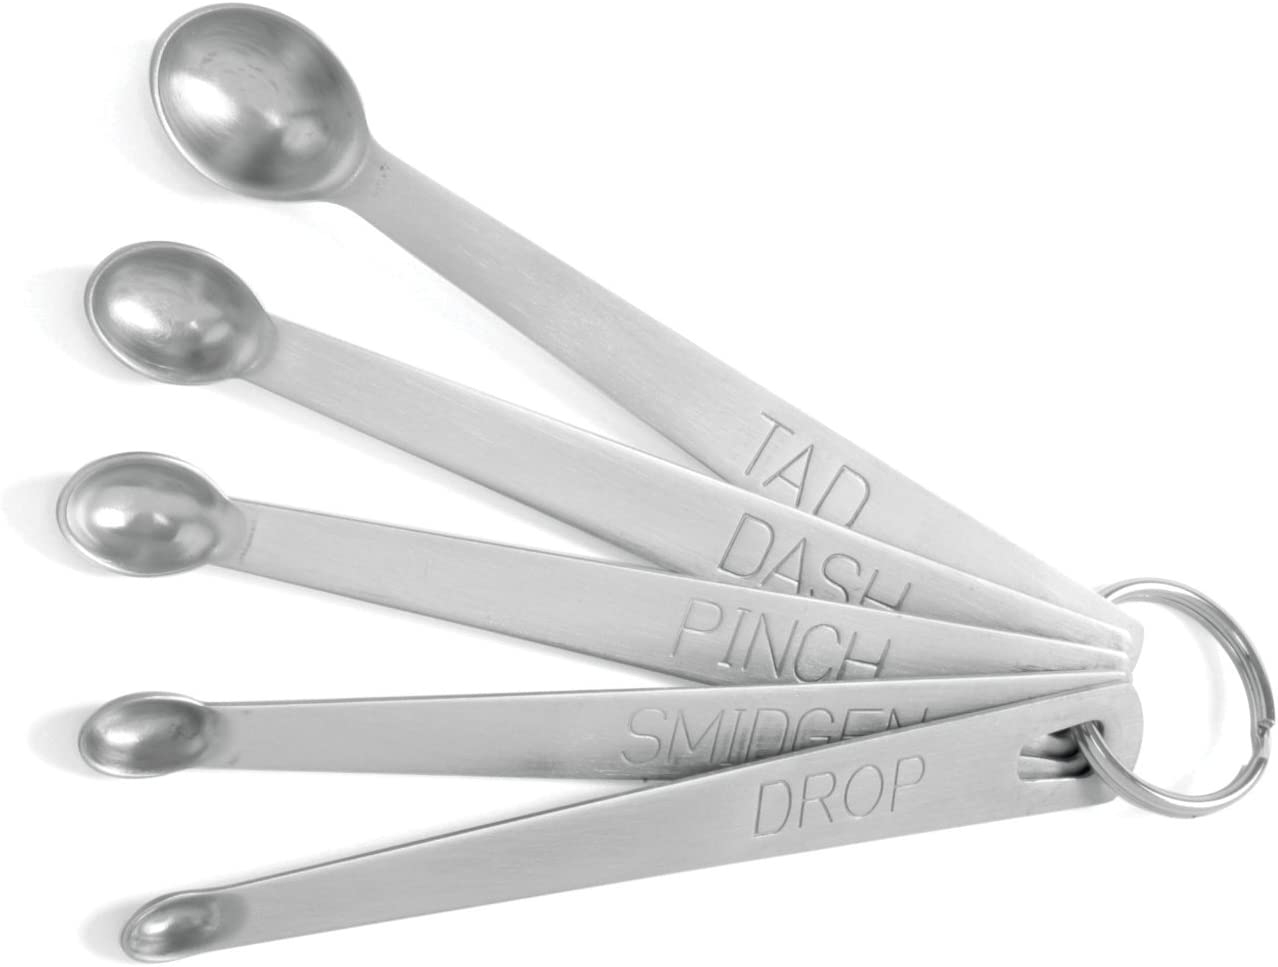 Norpro Mini Stainless Steel Measuring Spoons, Set of 5 (tad, dash, pinch, smidgen and drop) Import To Shop ×Product